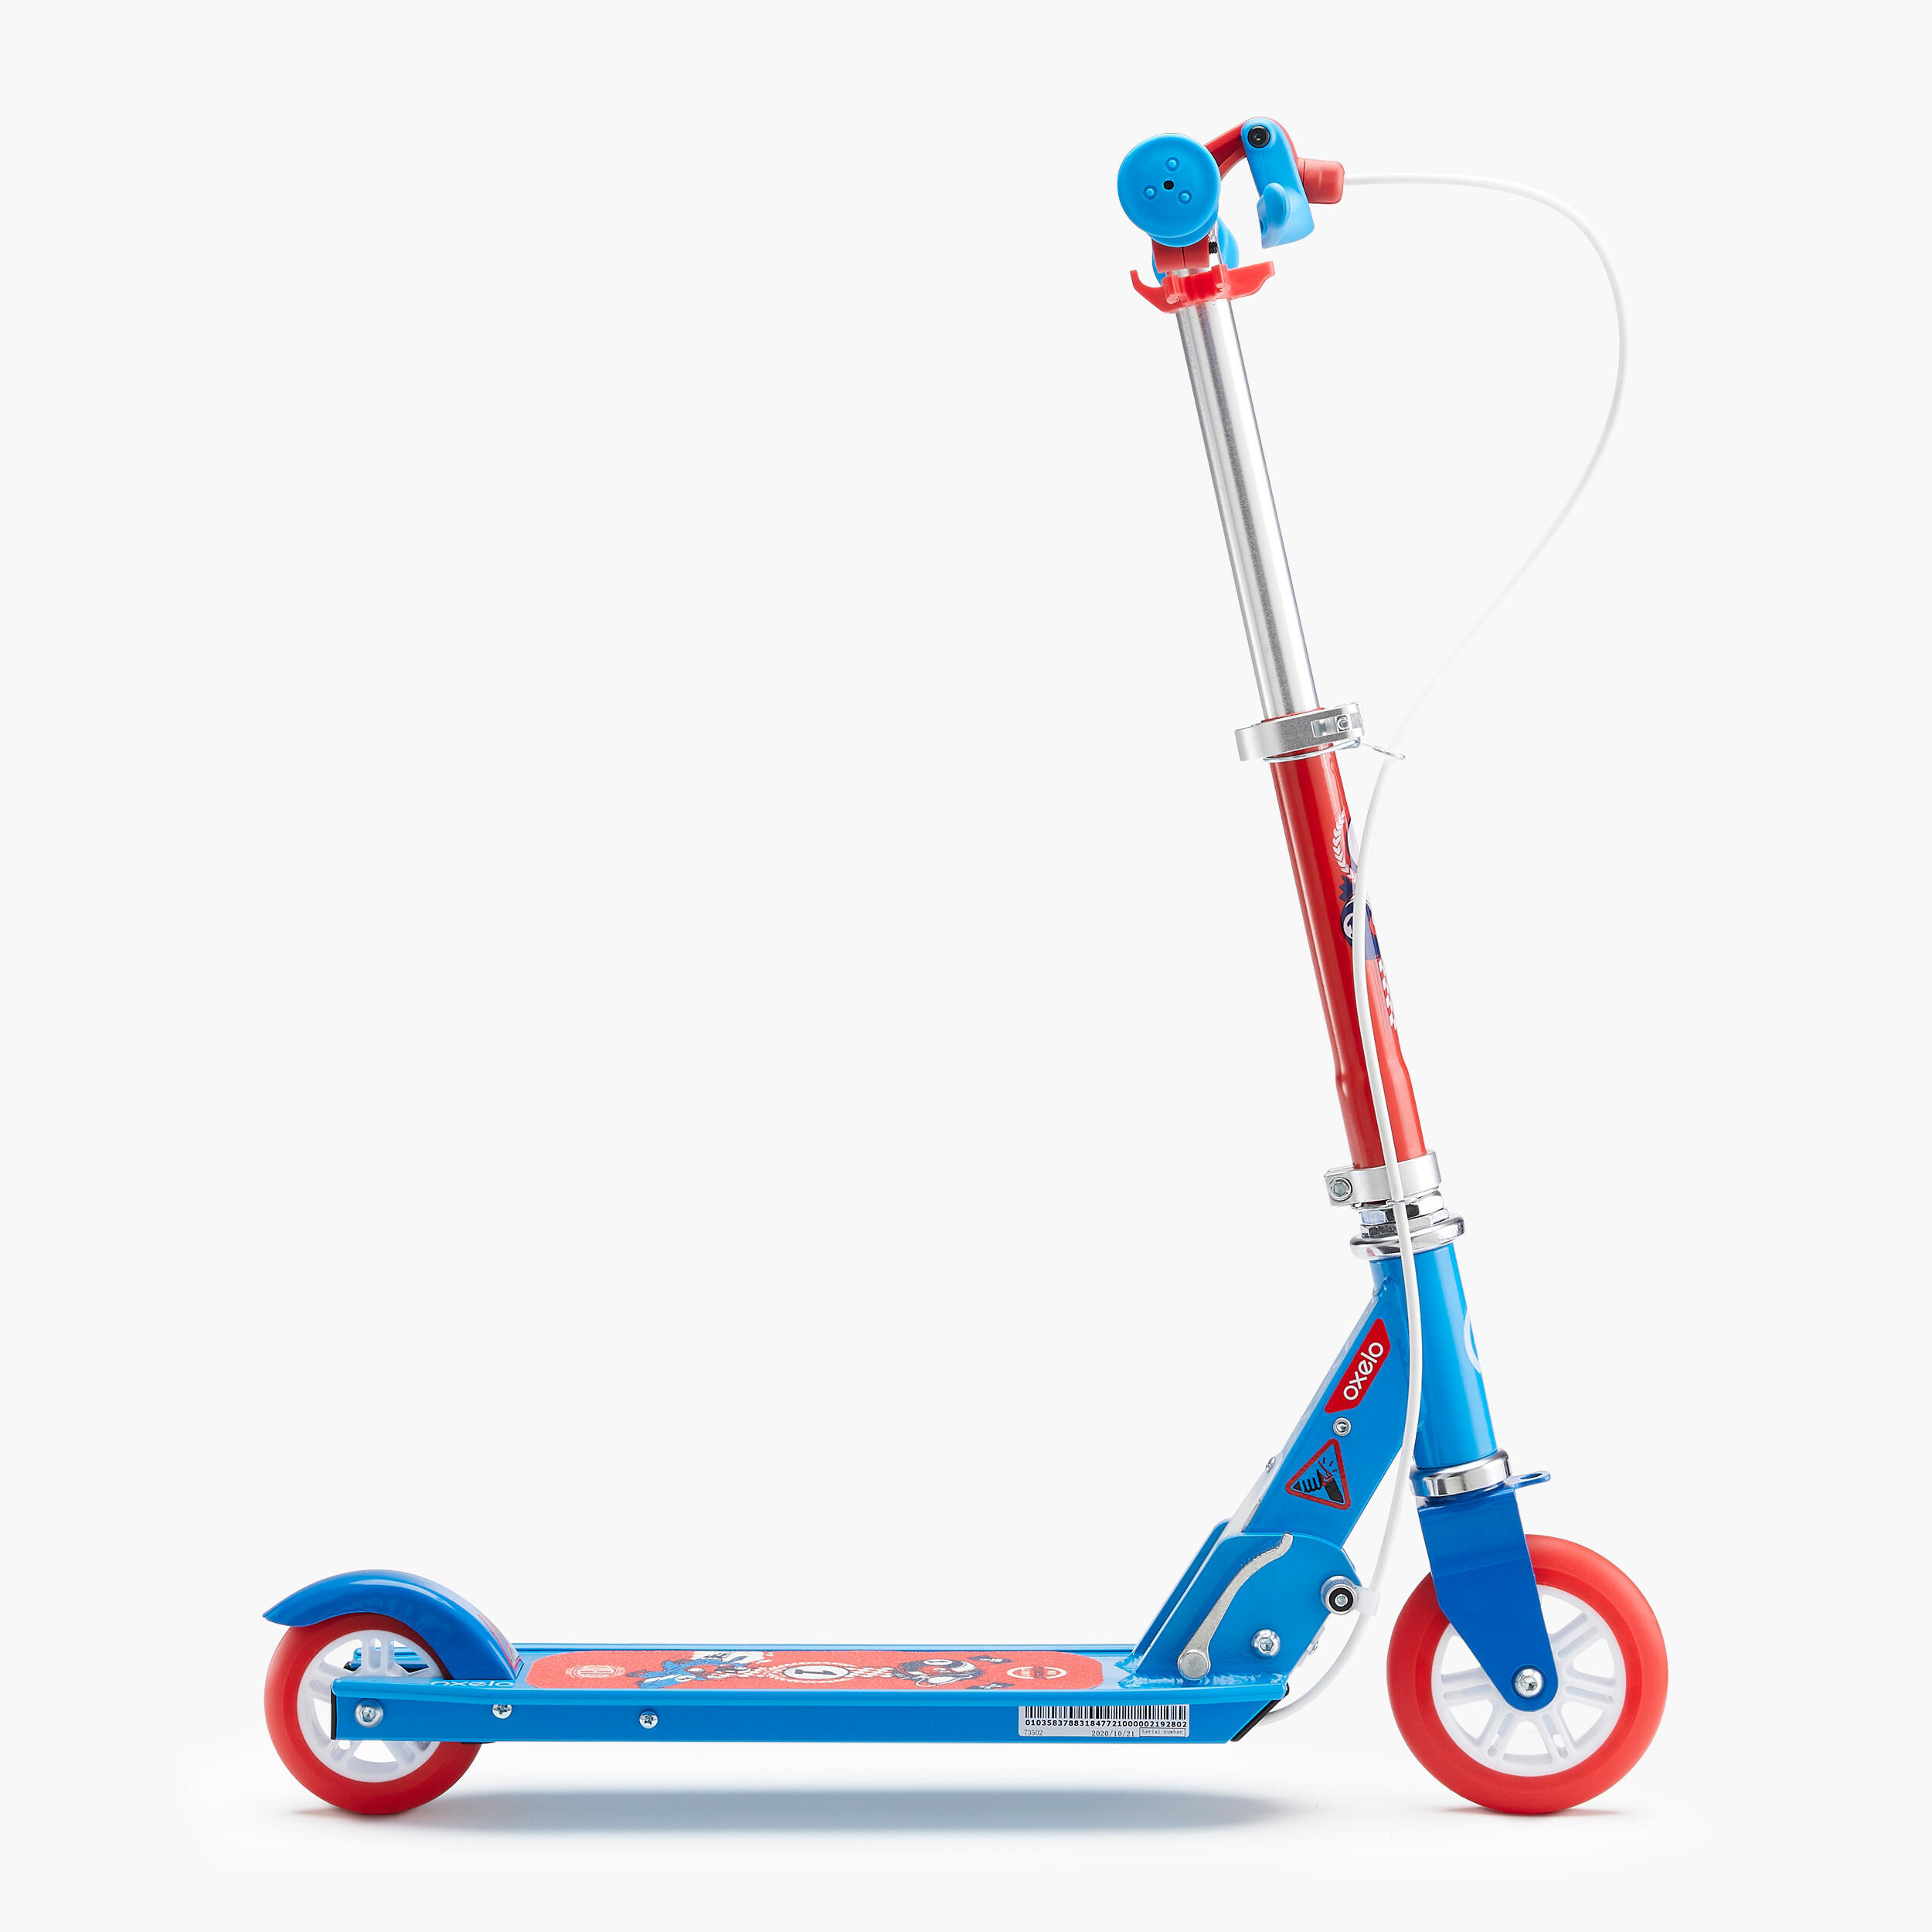 Play 5 Children's Scooter with Brake - Blue 2/9